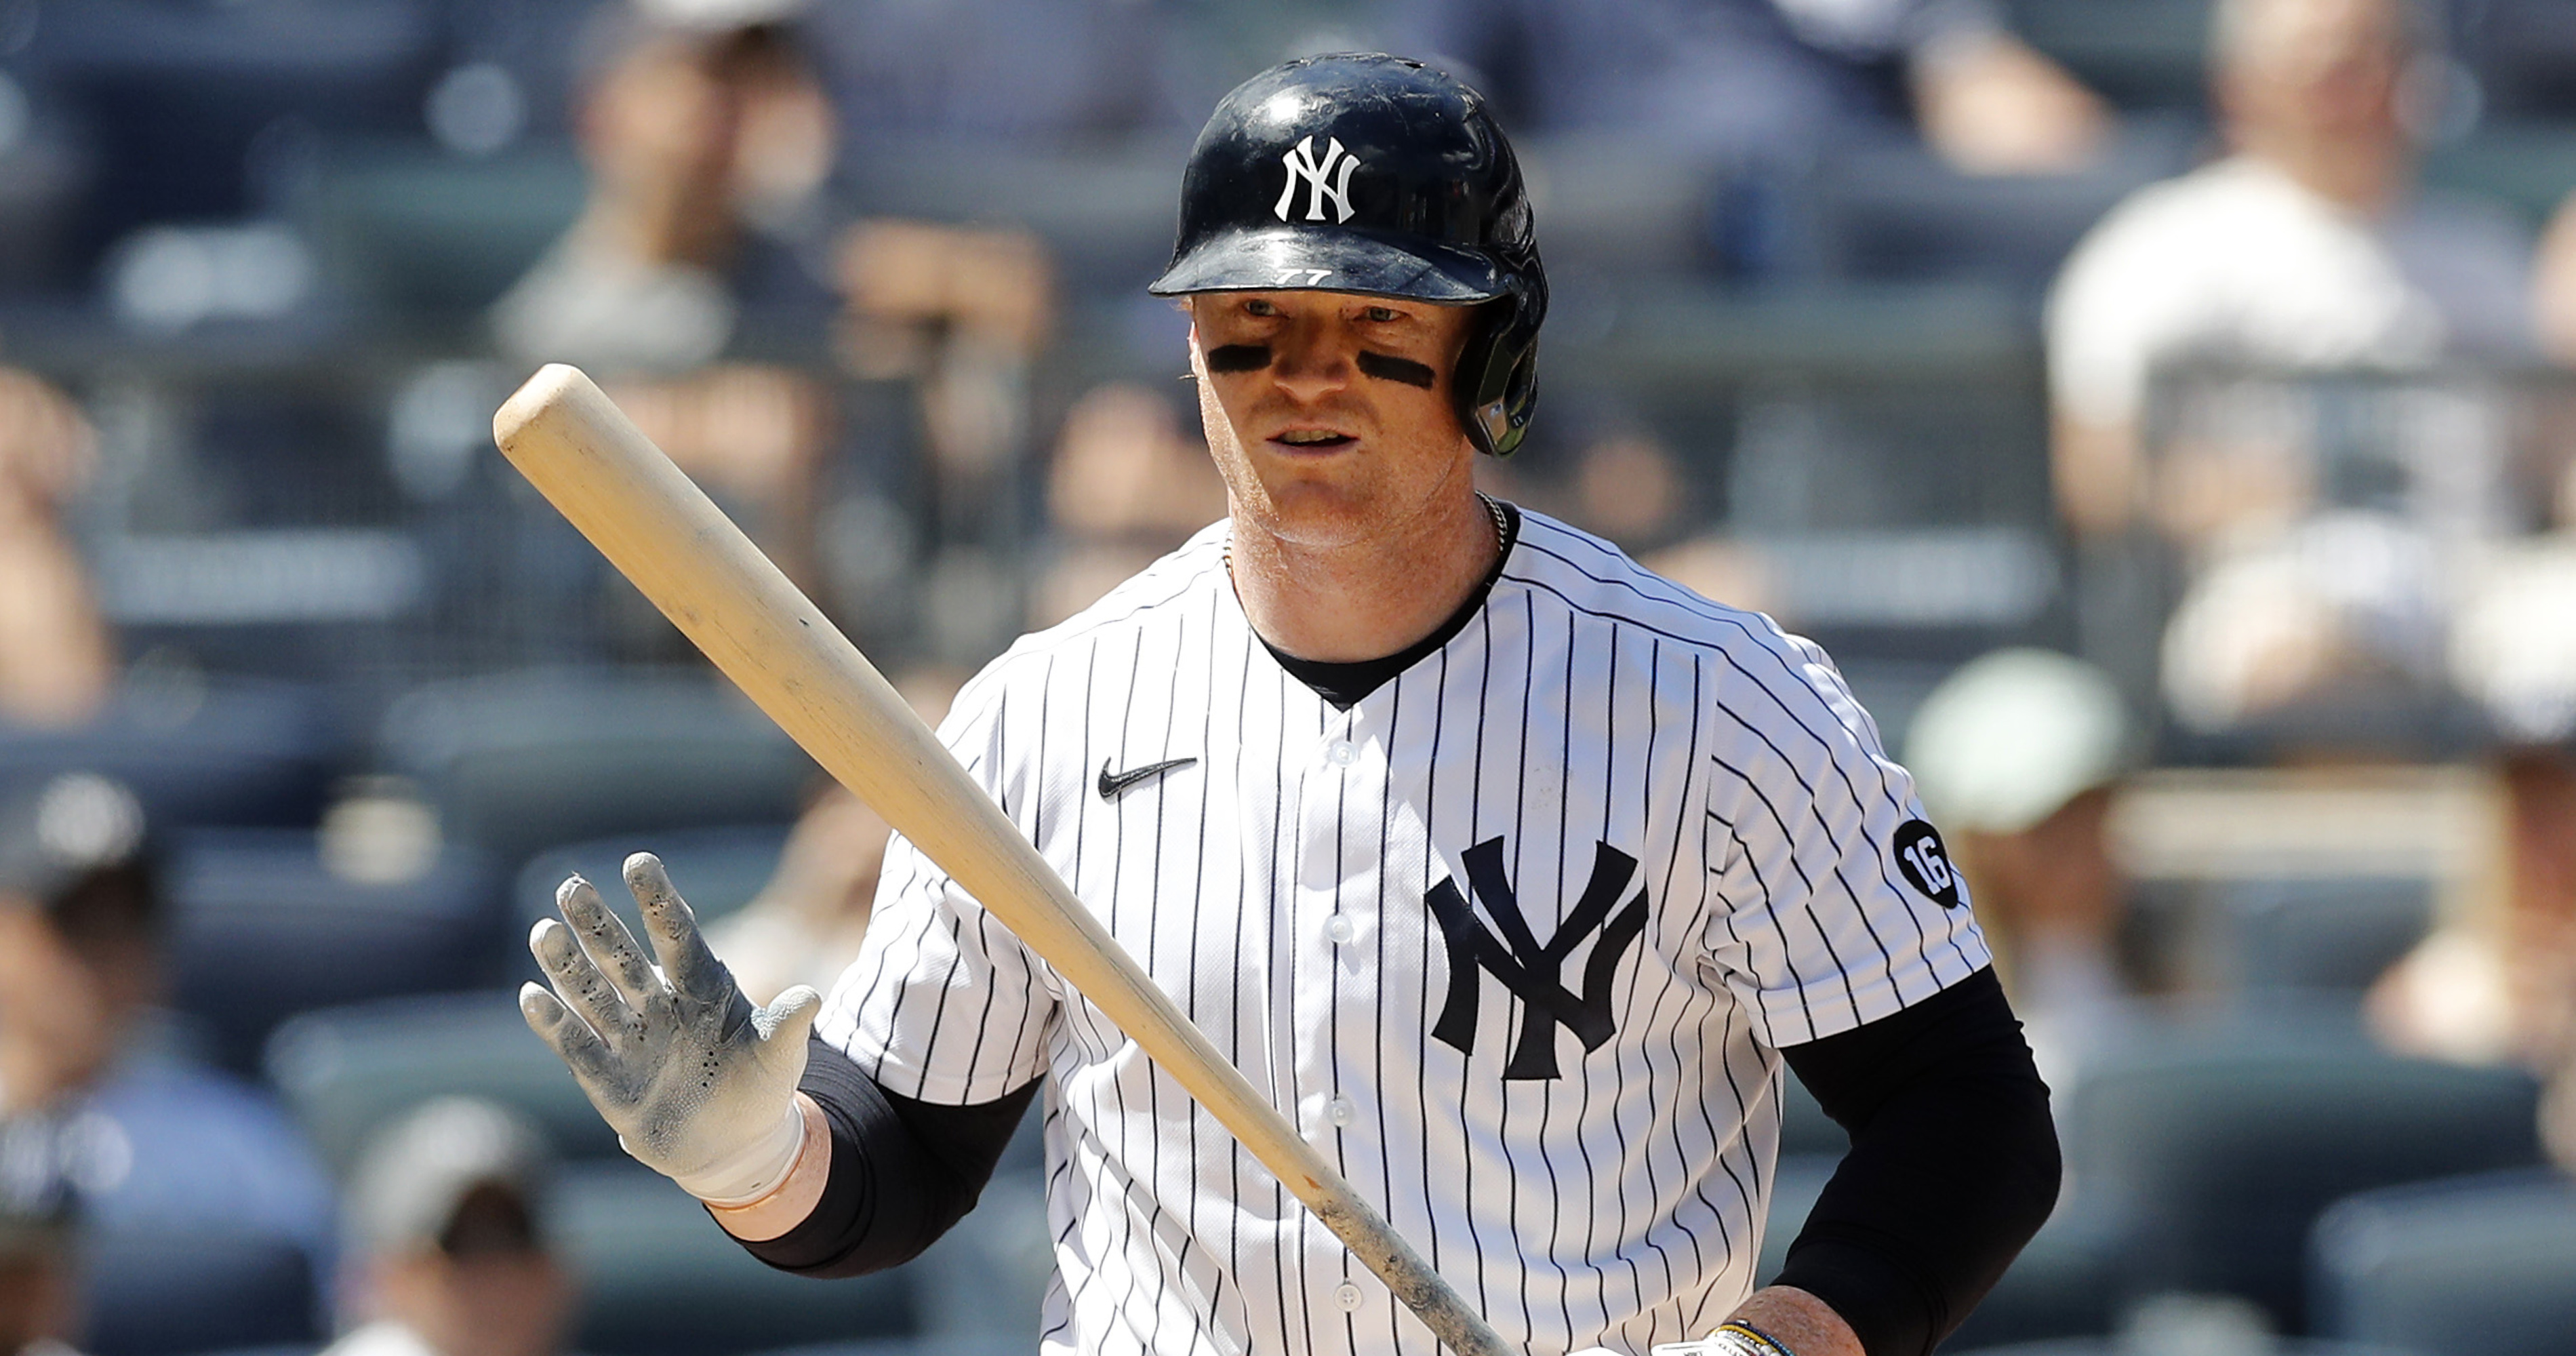 Clint Frazier nearing deal with Cubs after Yankees release